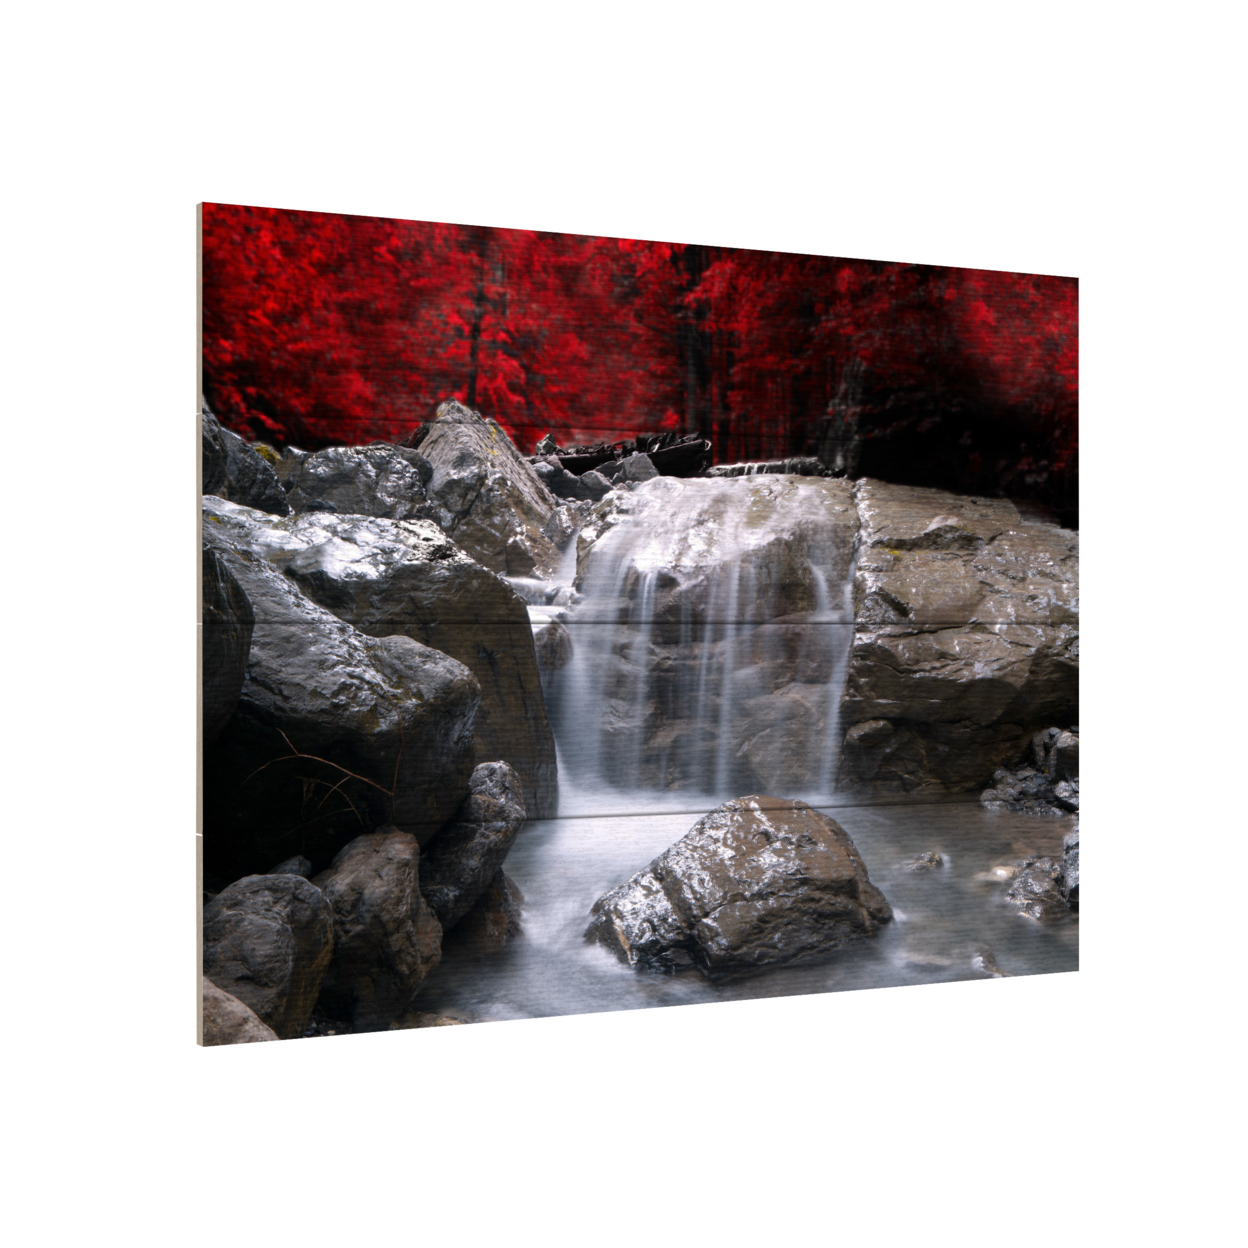 Wall Art 12 X 16 Inches Titled Red Vison Ready To Hang Printed On Wooden Planks